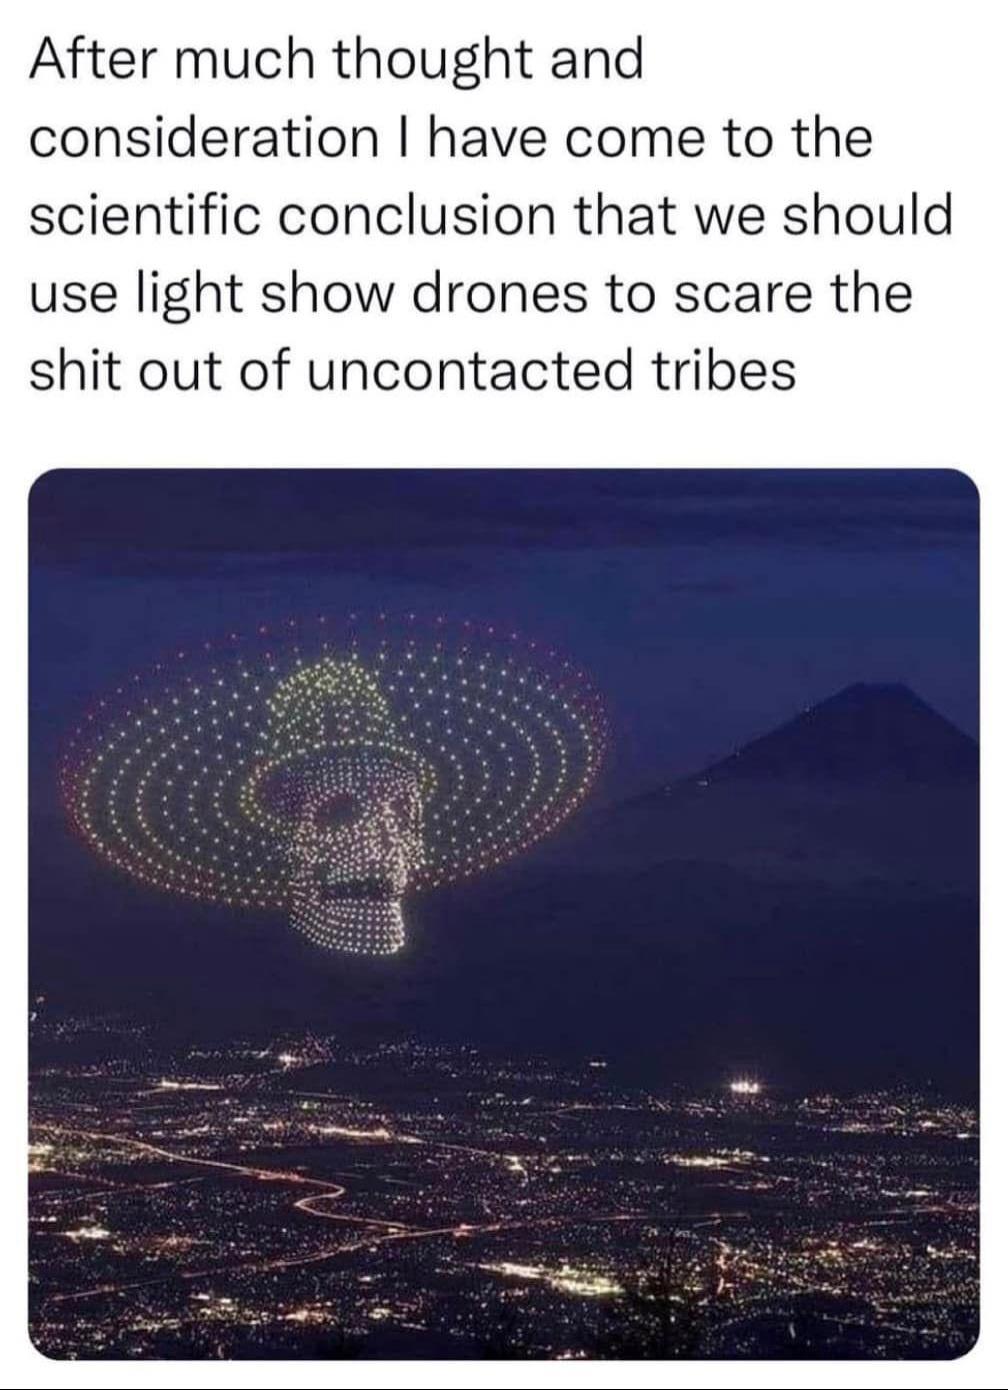 cool pics and memes - sky - After much thought and consideration I have come to the scientific conclusion that we should use light show drones to scare the shit out of uncontacted tribes